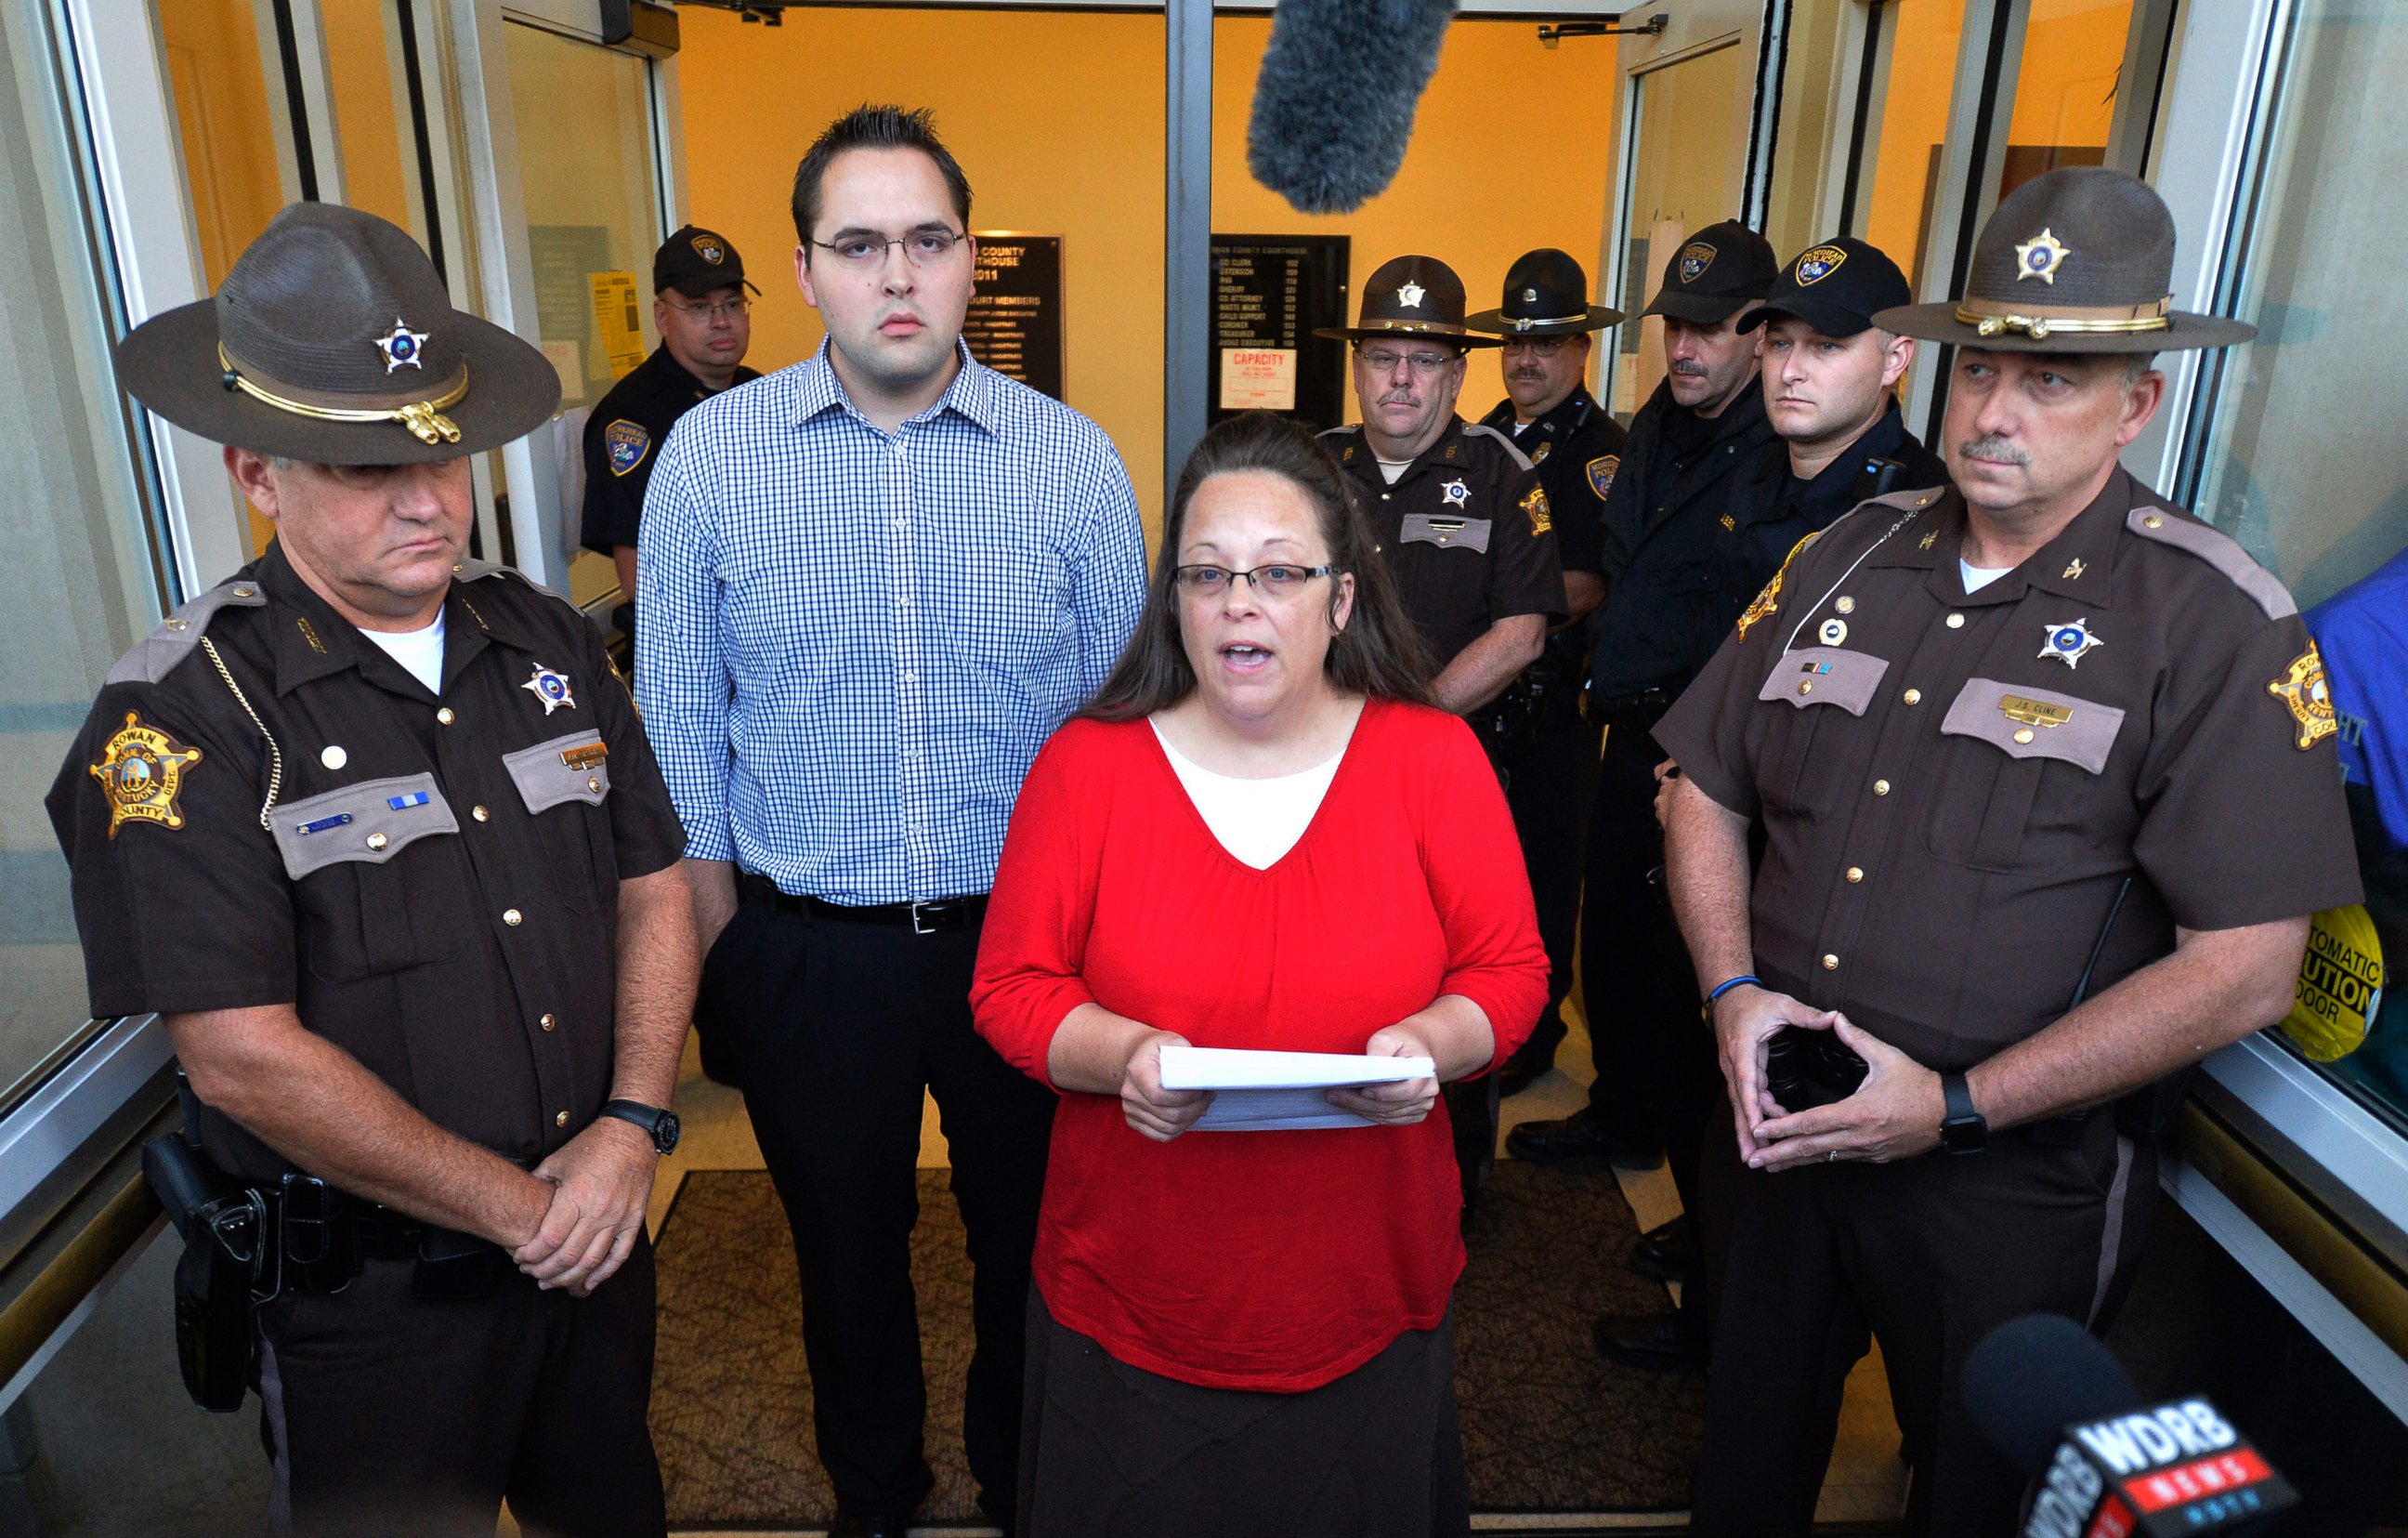 PHOTO: Surrounded by Rowan County Sheriff's deputies, Rowan County Clerk Kim Davis, center, with her son Nathan Davis standing by her side, makes a statement to the media at the front door of the Rowan County Judicial Center in Morehead, Ky.